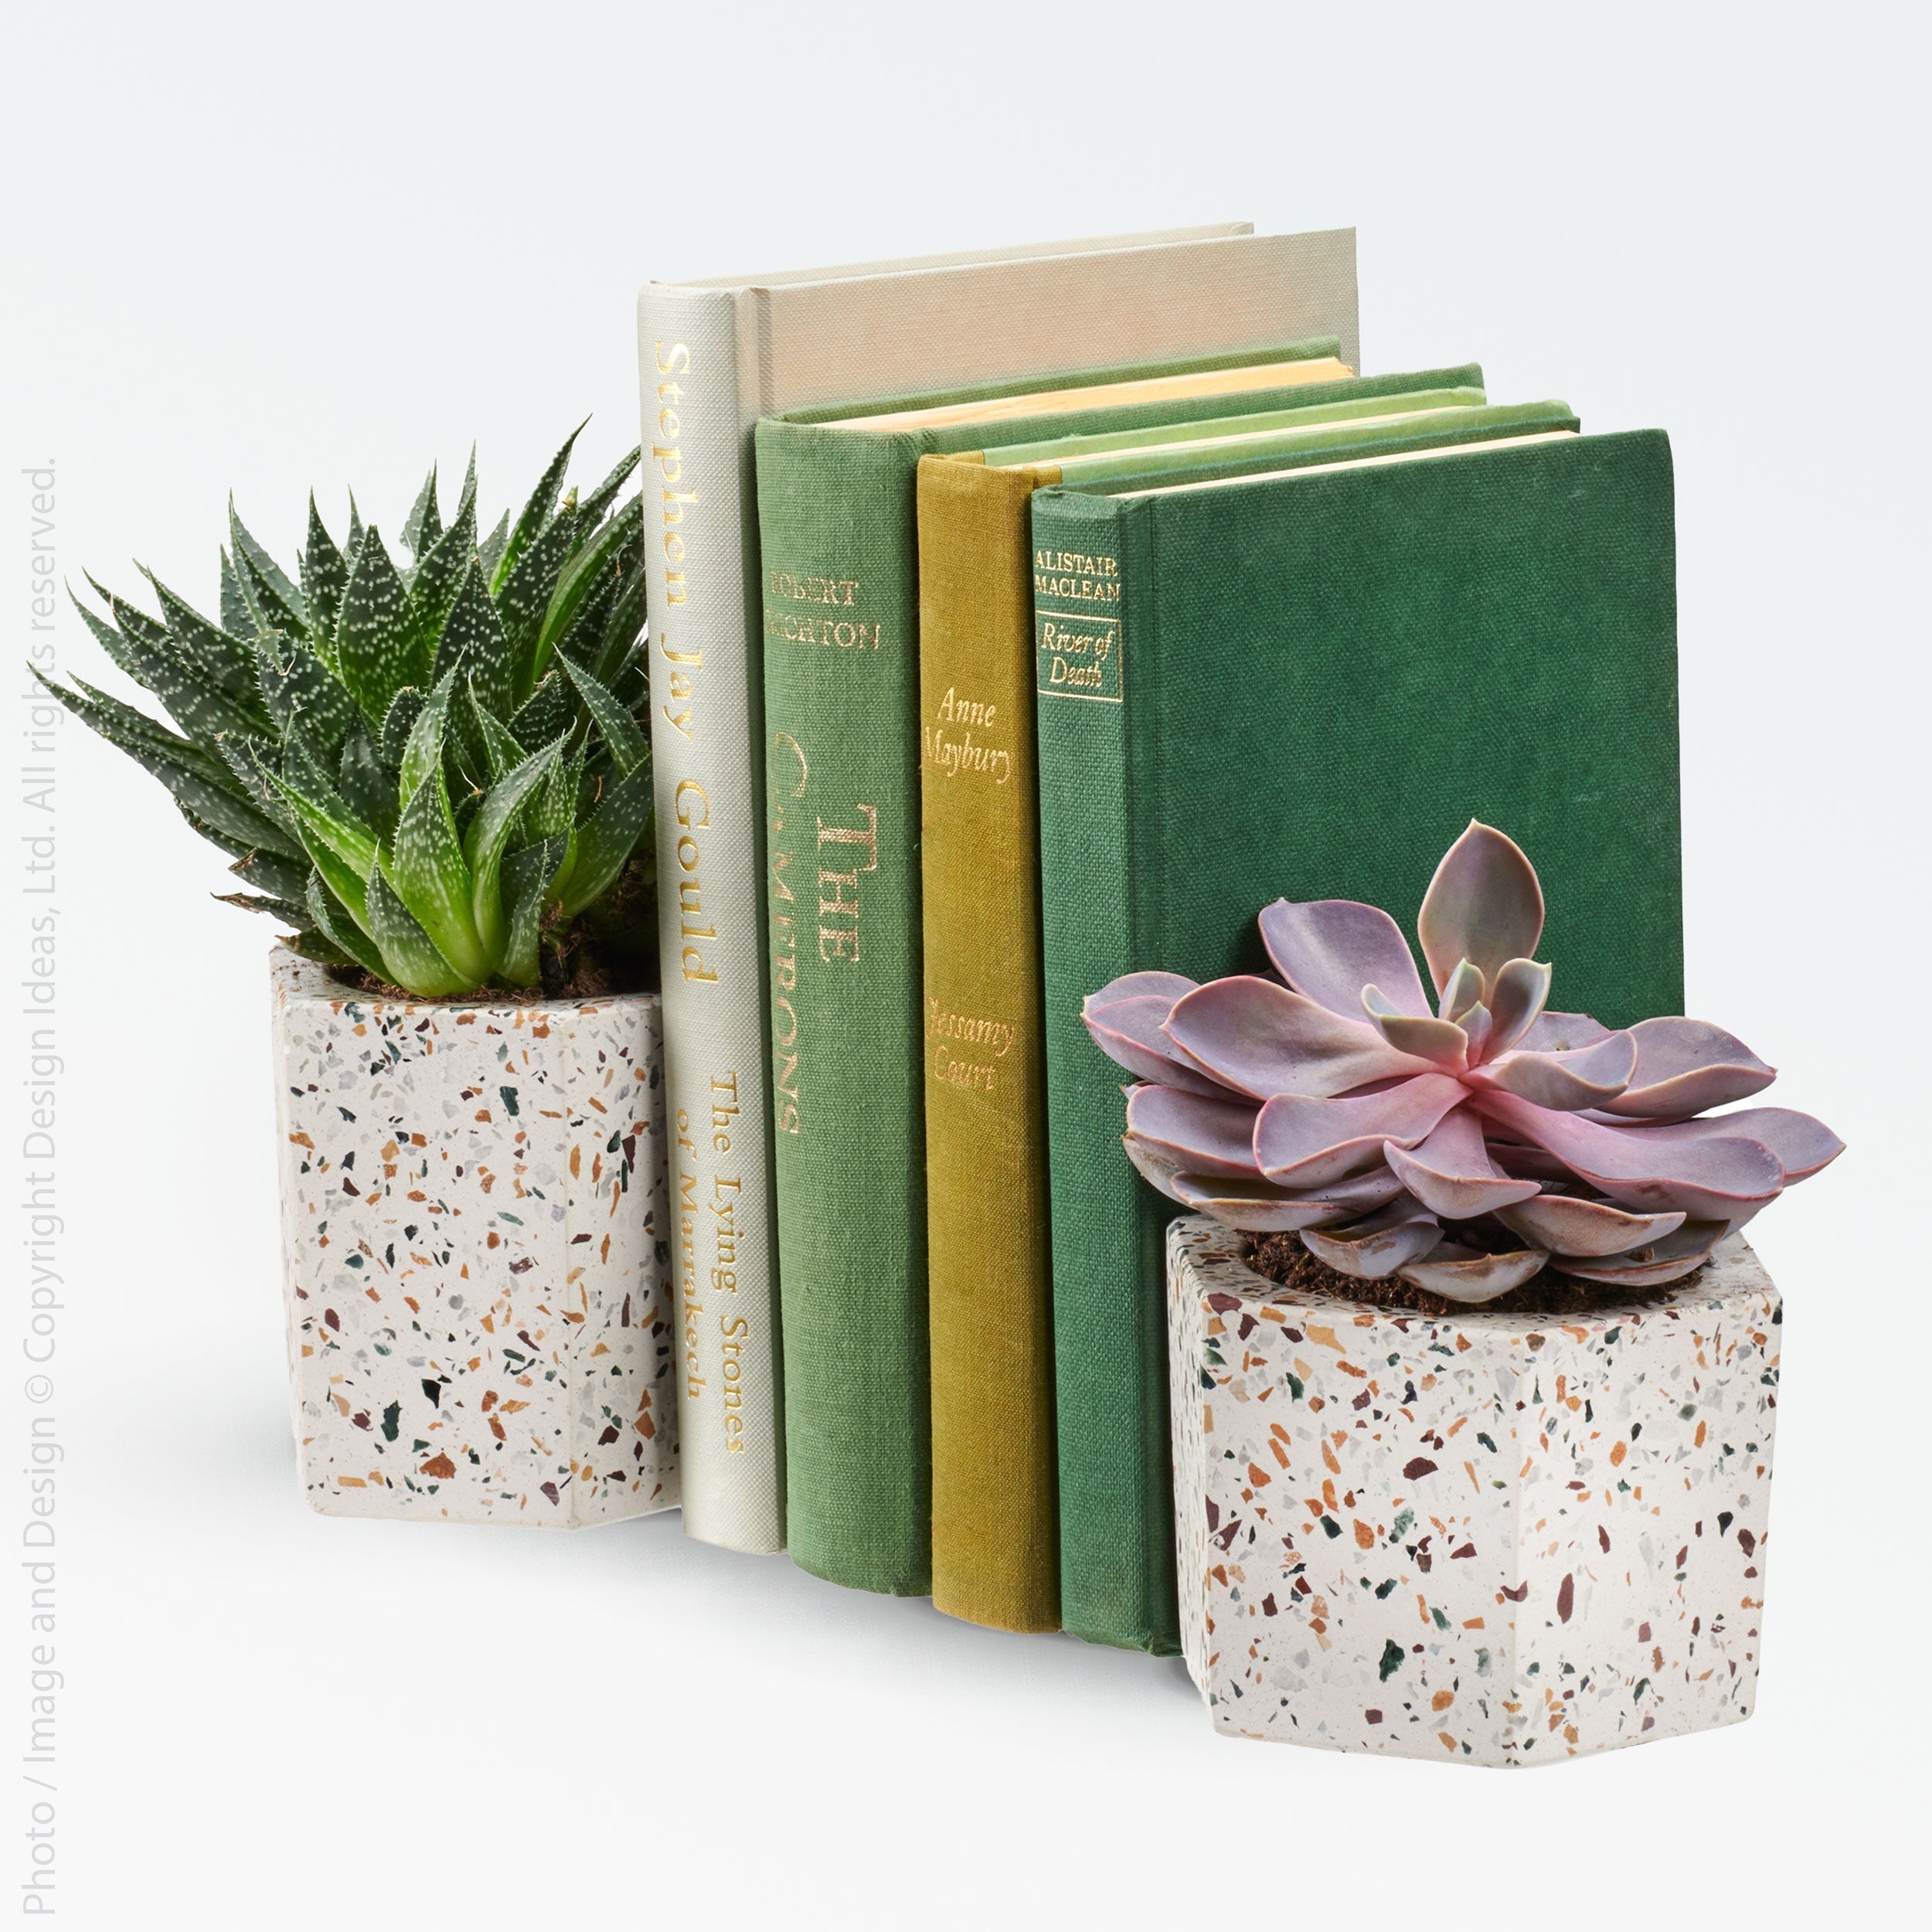 Terrazza Cement Hex Holders Terrazzo Color | Image 2 | From the Terrazza Collection | Elegantly created with natural cement for long lasting use | Available in terrazzo color | texxture home